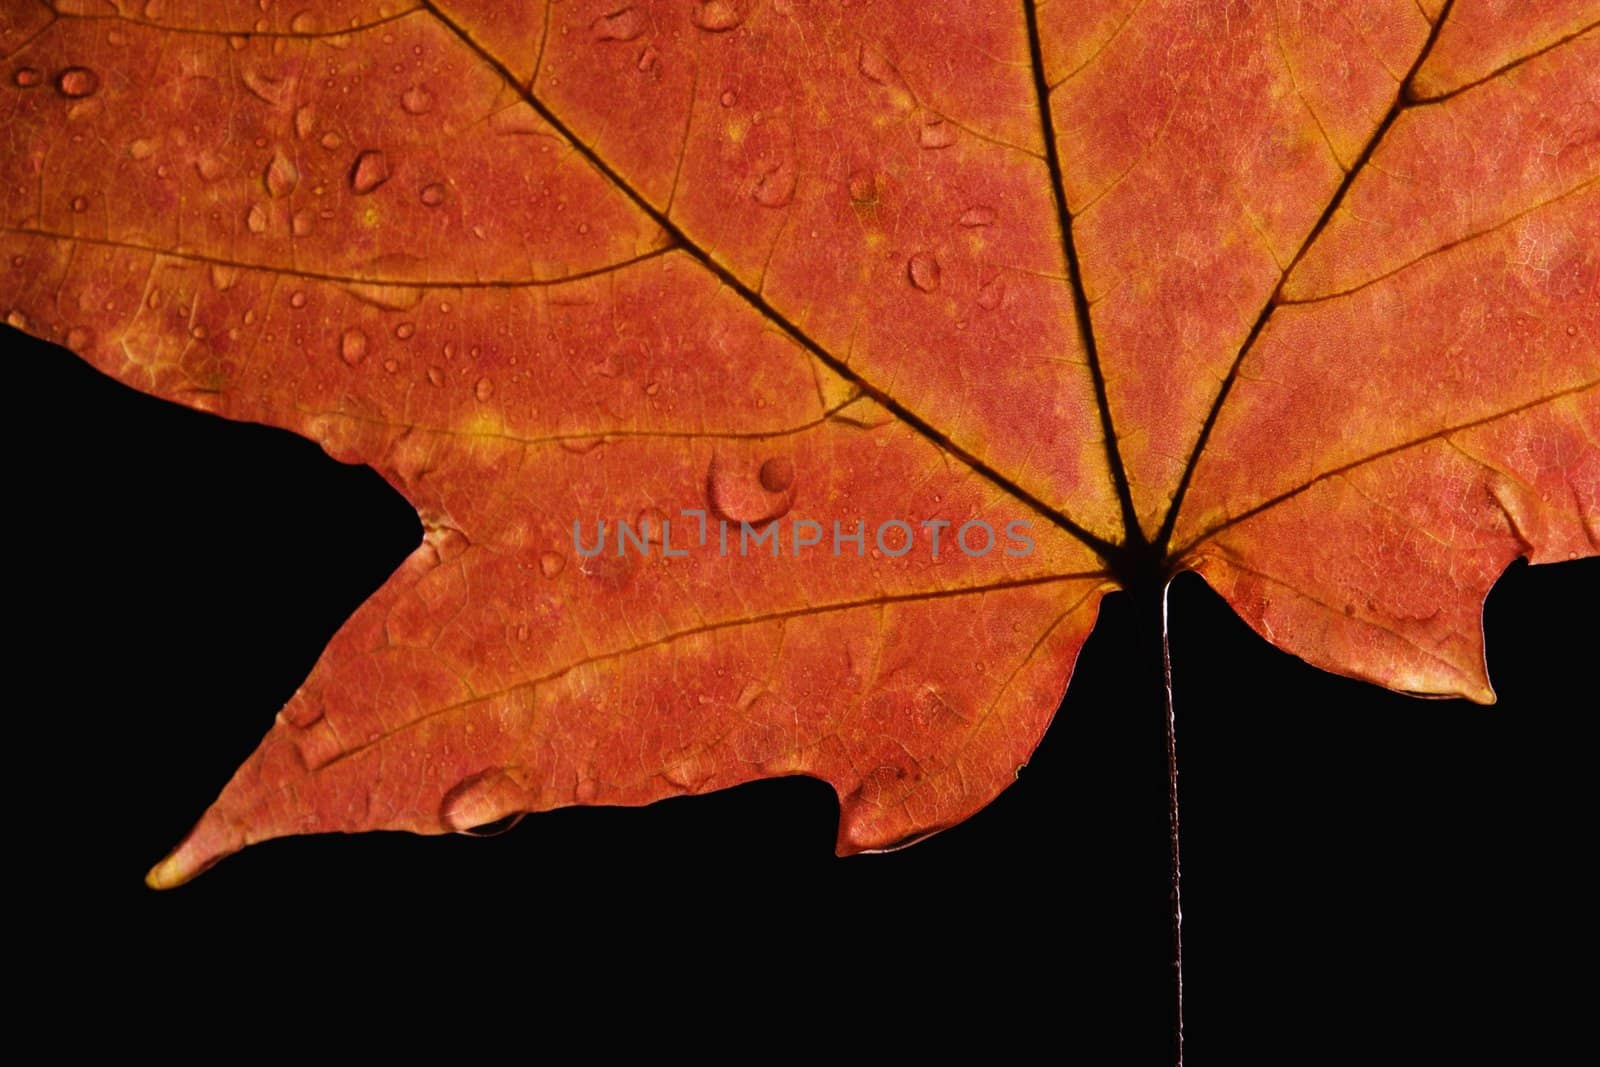 Close-up of Sugar Maple leaf in Fall color sprinkled with water droplets against black background.